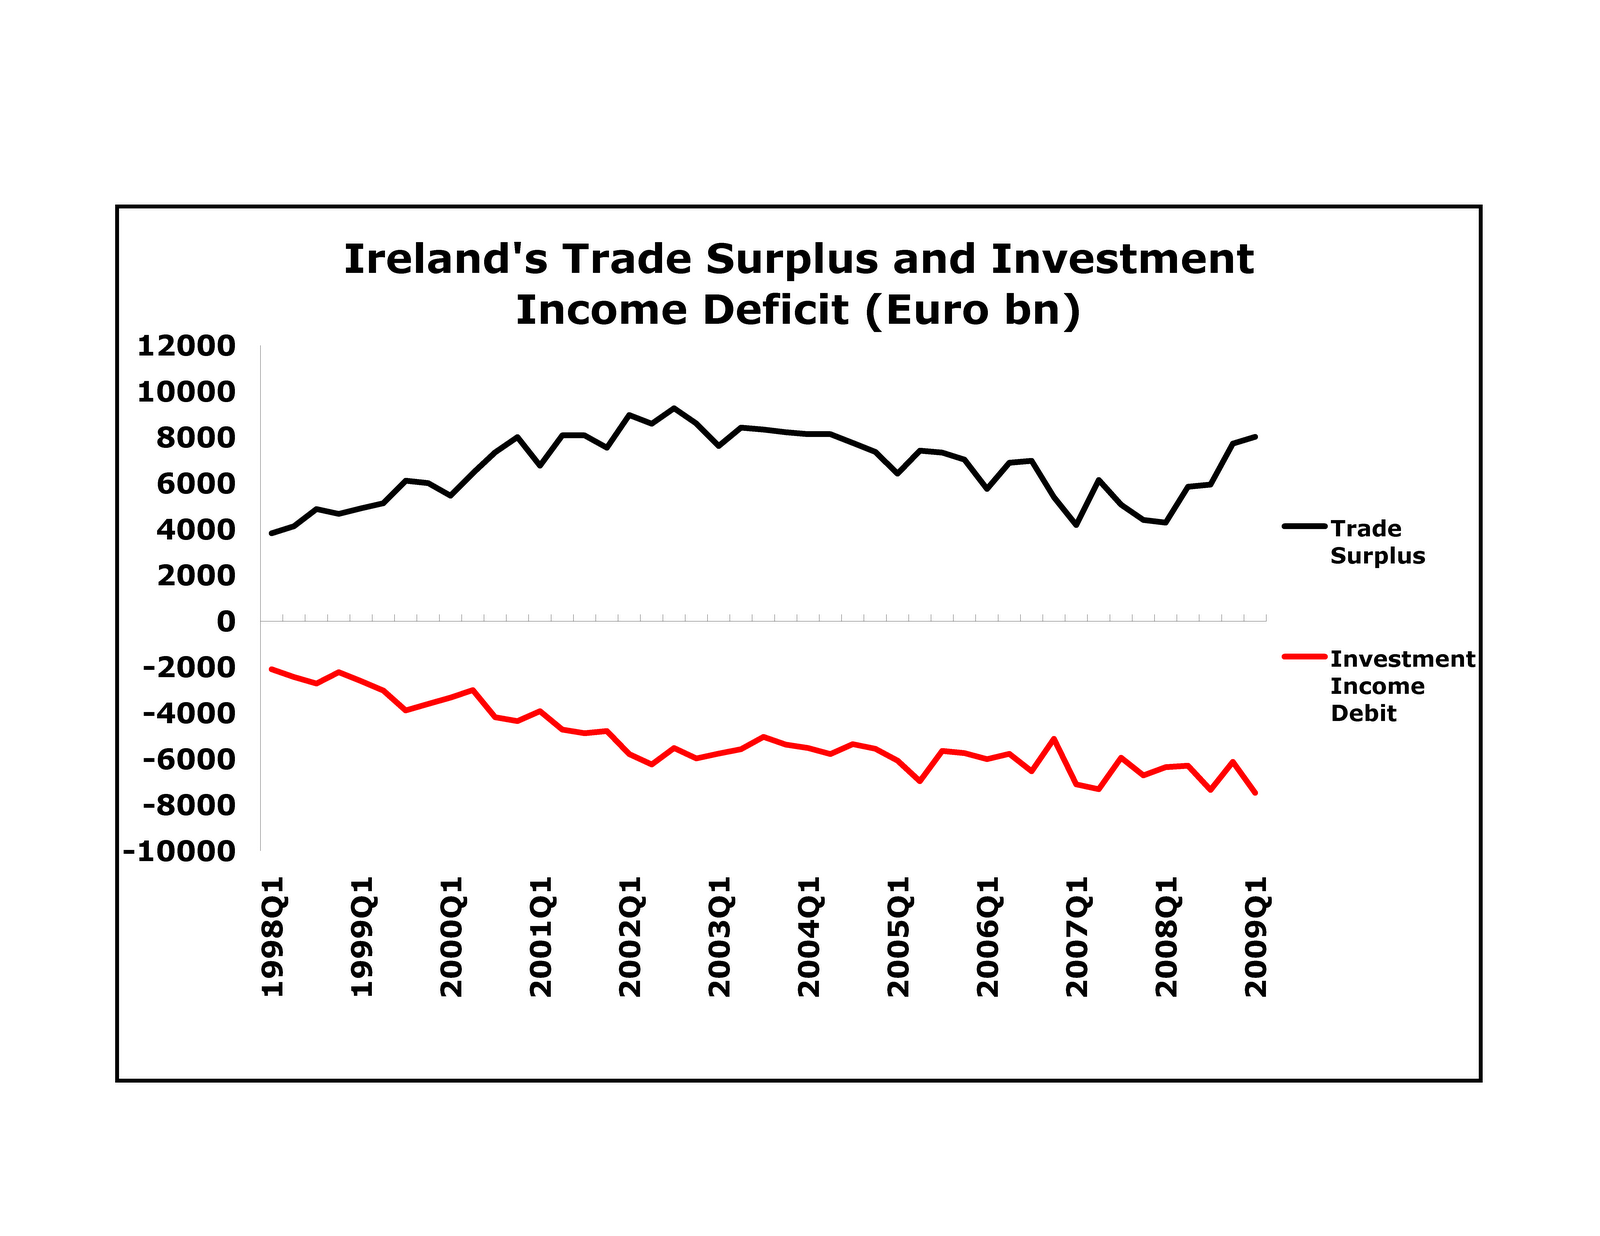 [Ireland's+Trade+Surplus+and+Investment+Income+Deficit.gif]